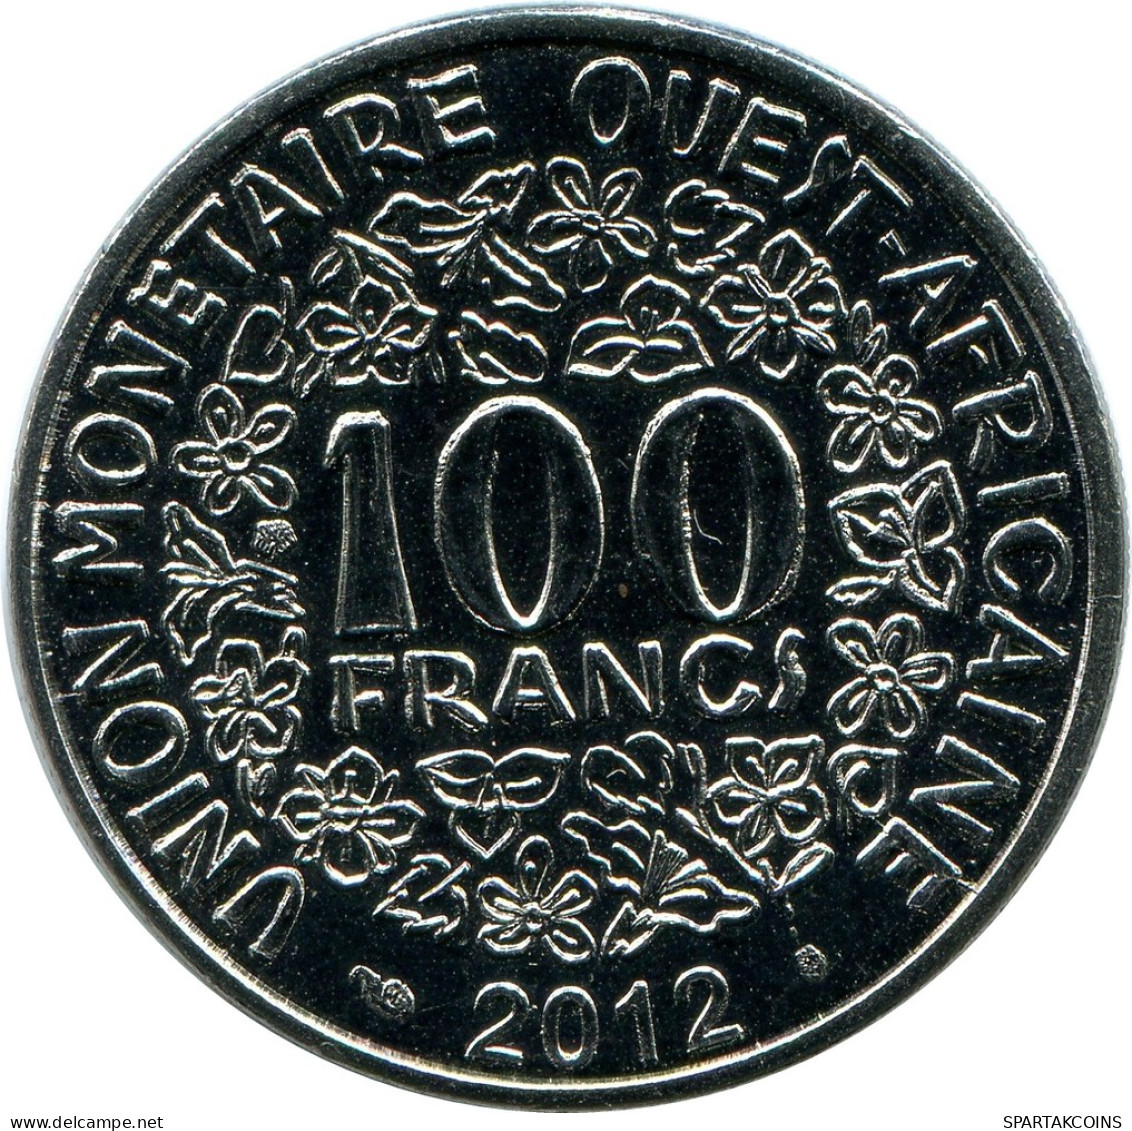 100 FRANCS 2012 WESTERN AFRICAN STATES Coin #AP962.U - Other - Africa